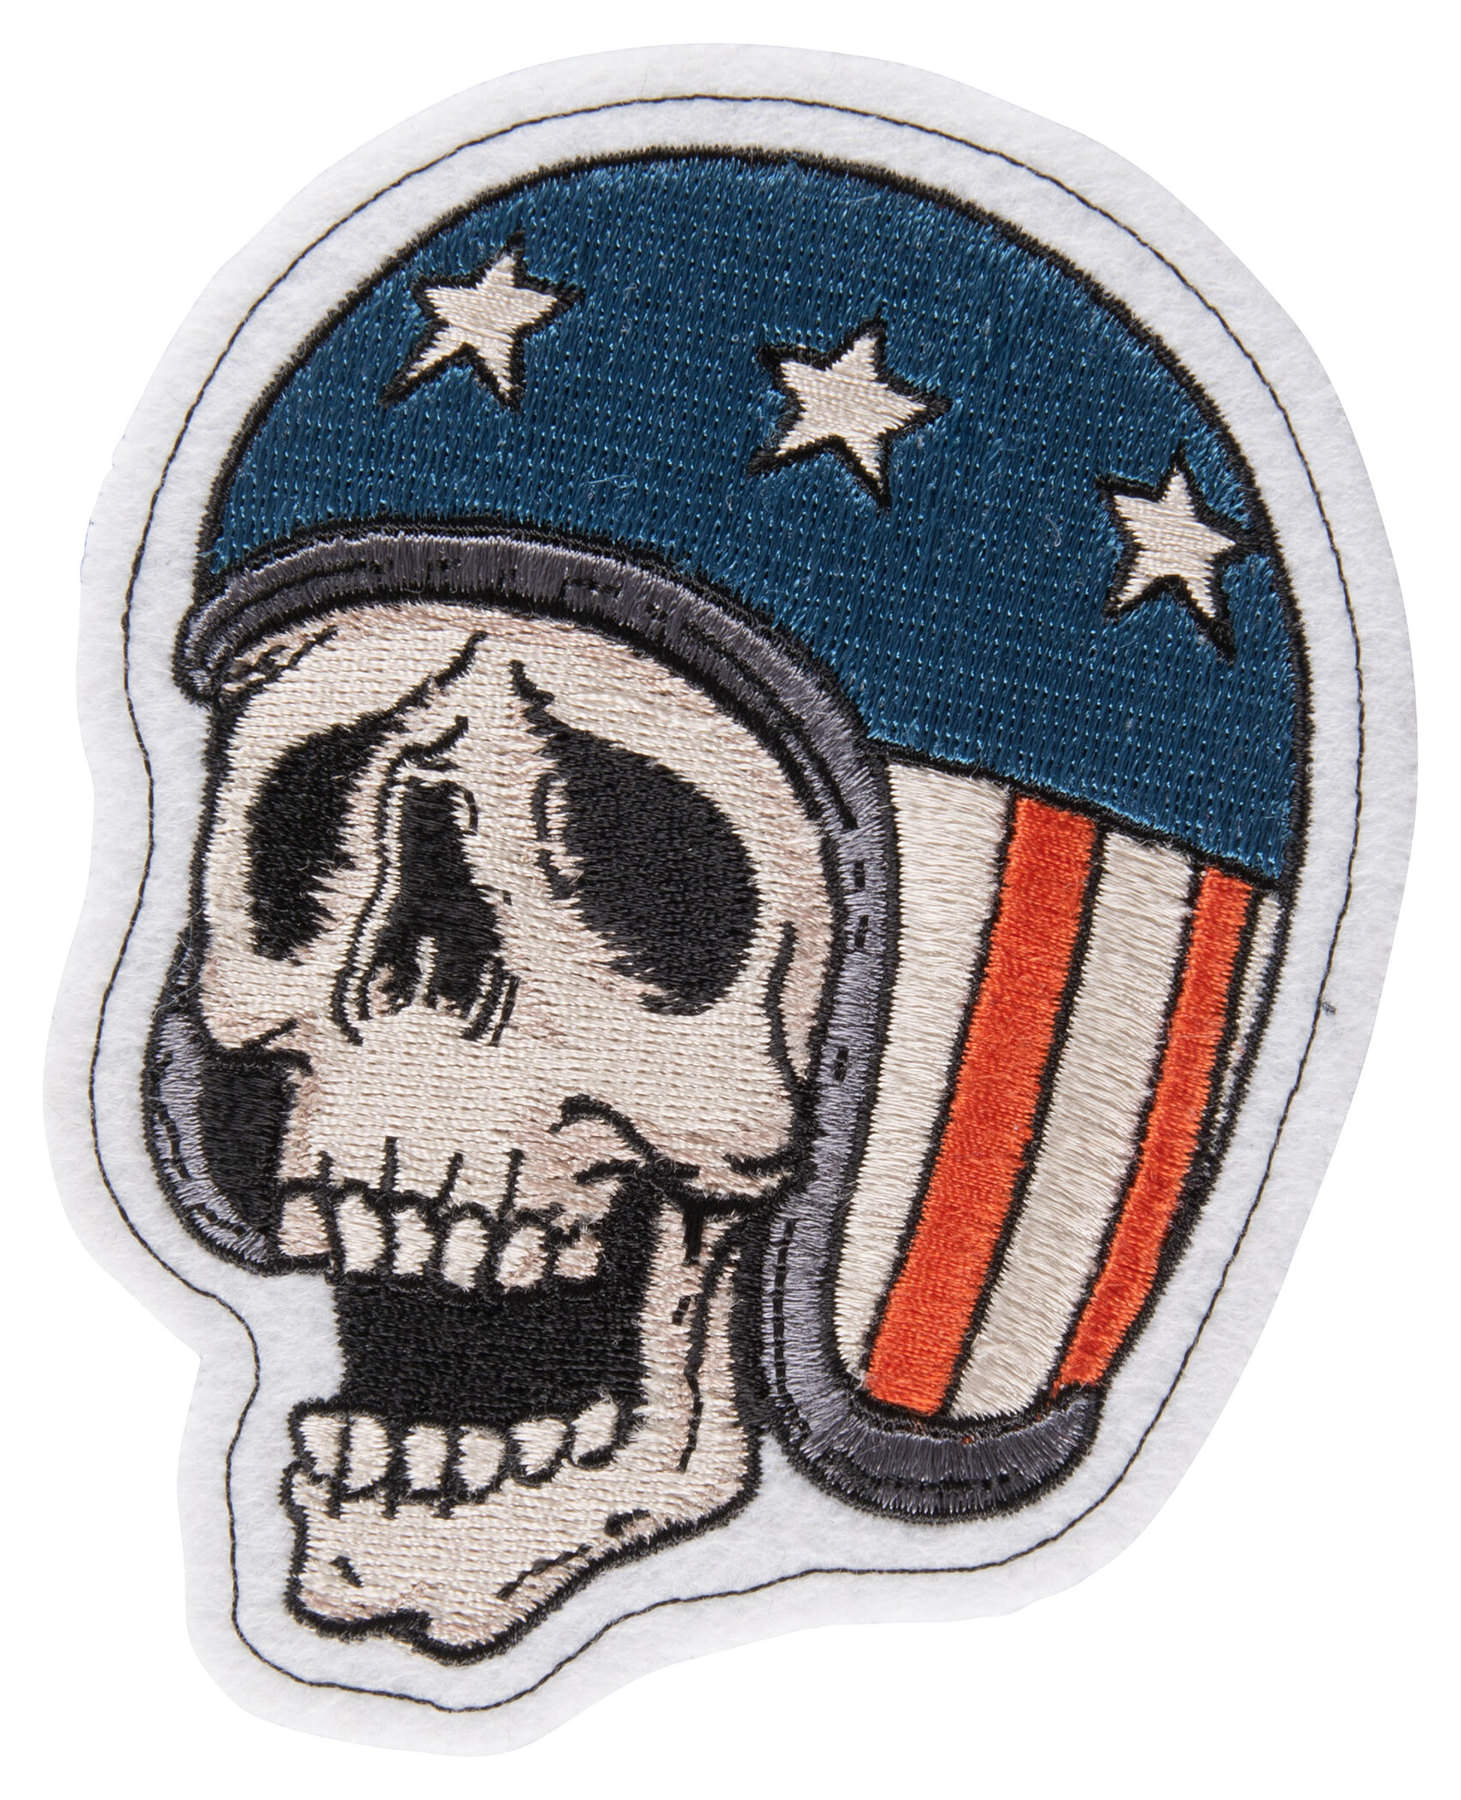 LETHAL THREAT SKULL WITH WINGS PATCH 11 INCHES WIDE VEST BACK PATCH 